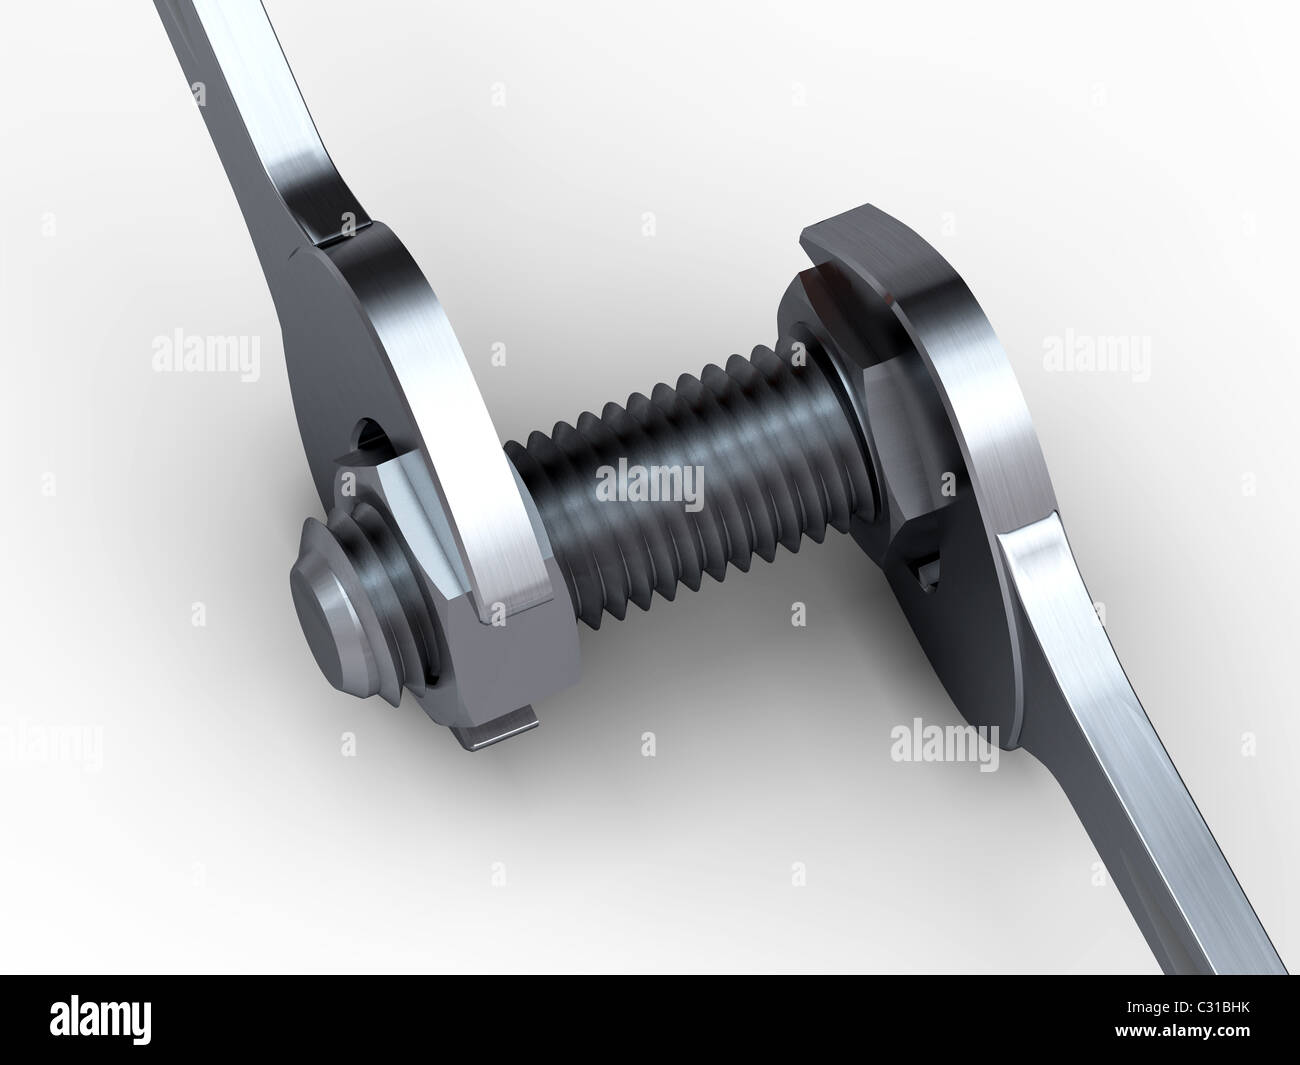 3D rendering of wrench and nuts on white background Stock Photo